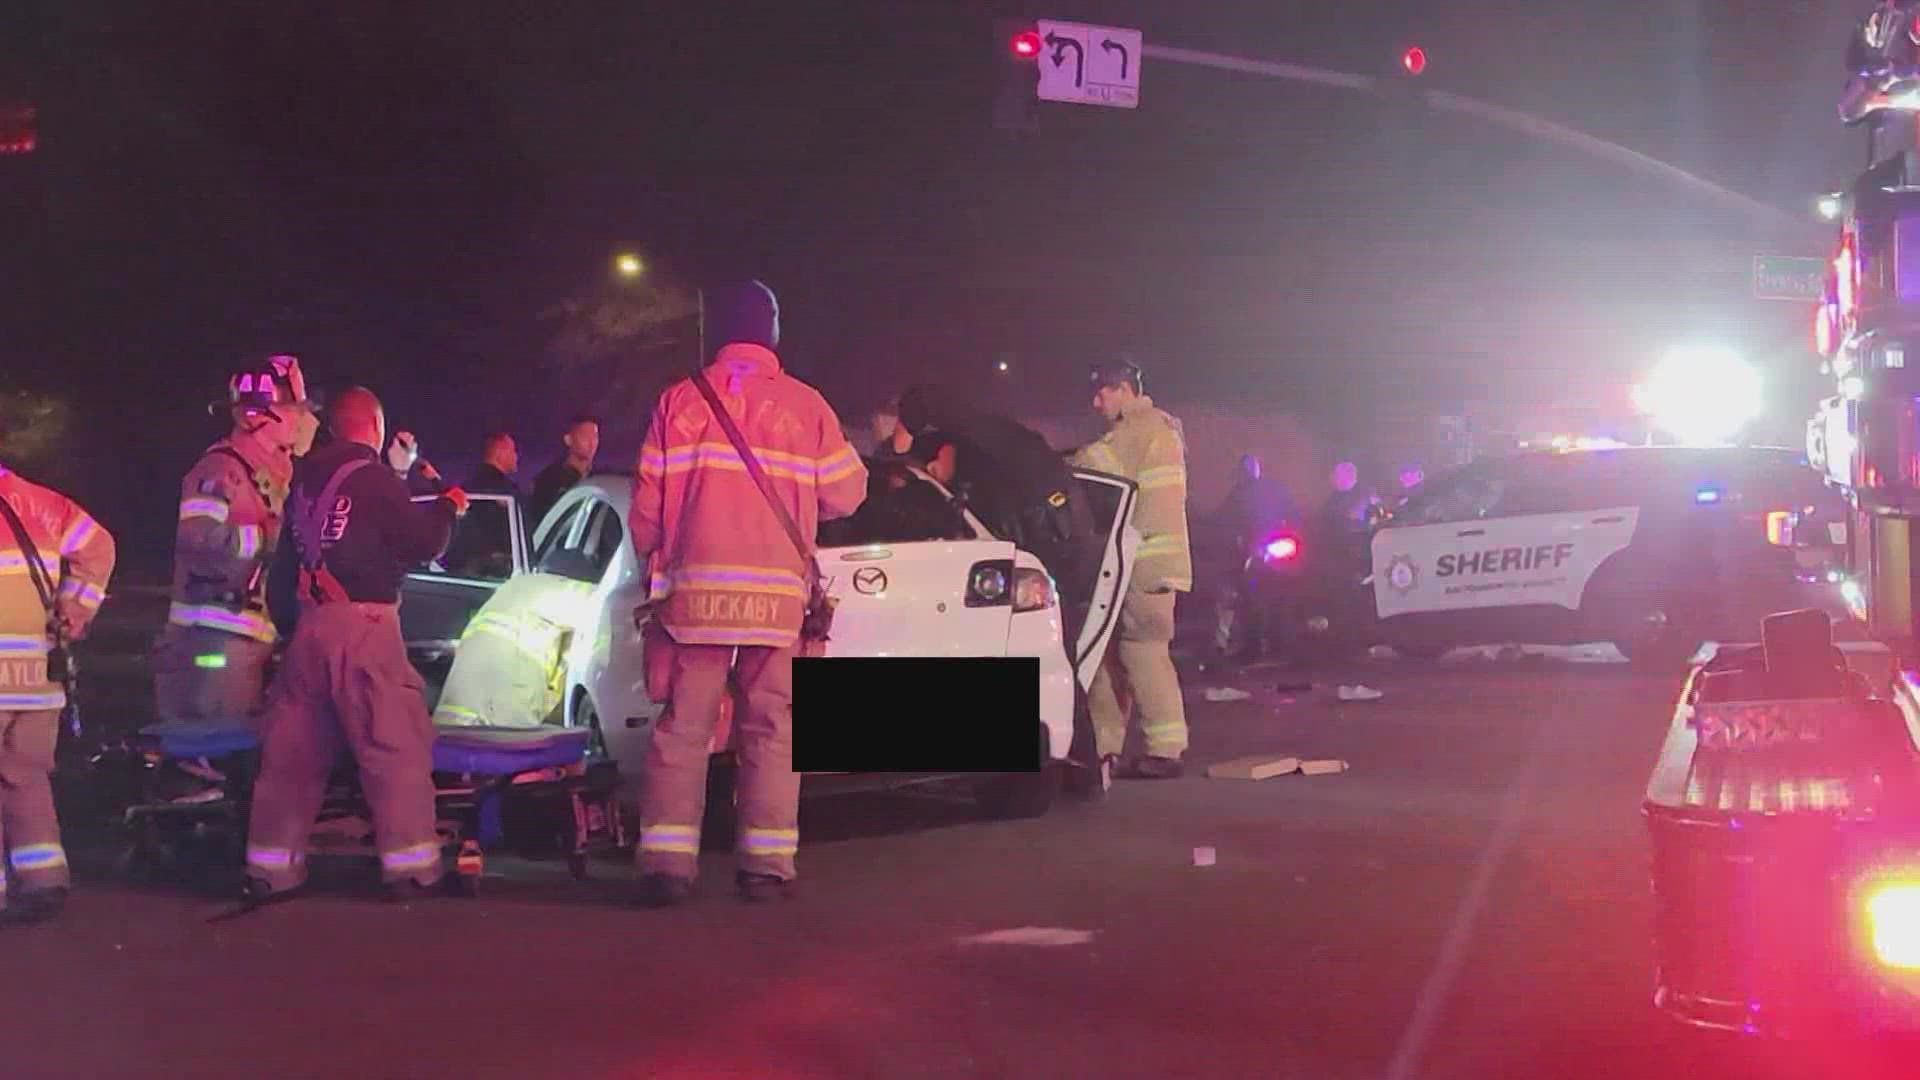 The crash happened around Thursday morning at 2 a.m. on Elverta Road and Watt Avenue in Antelope.